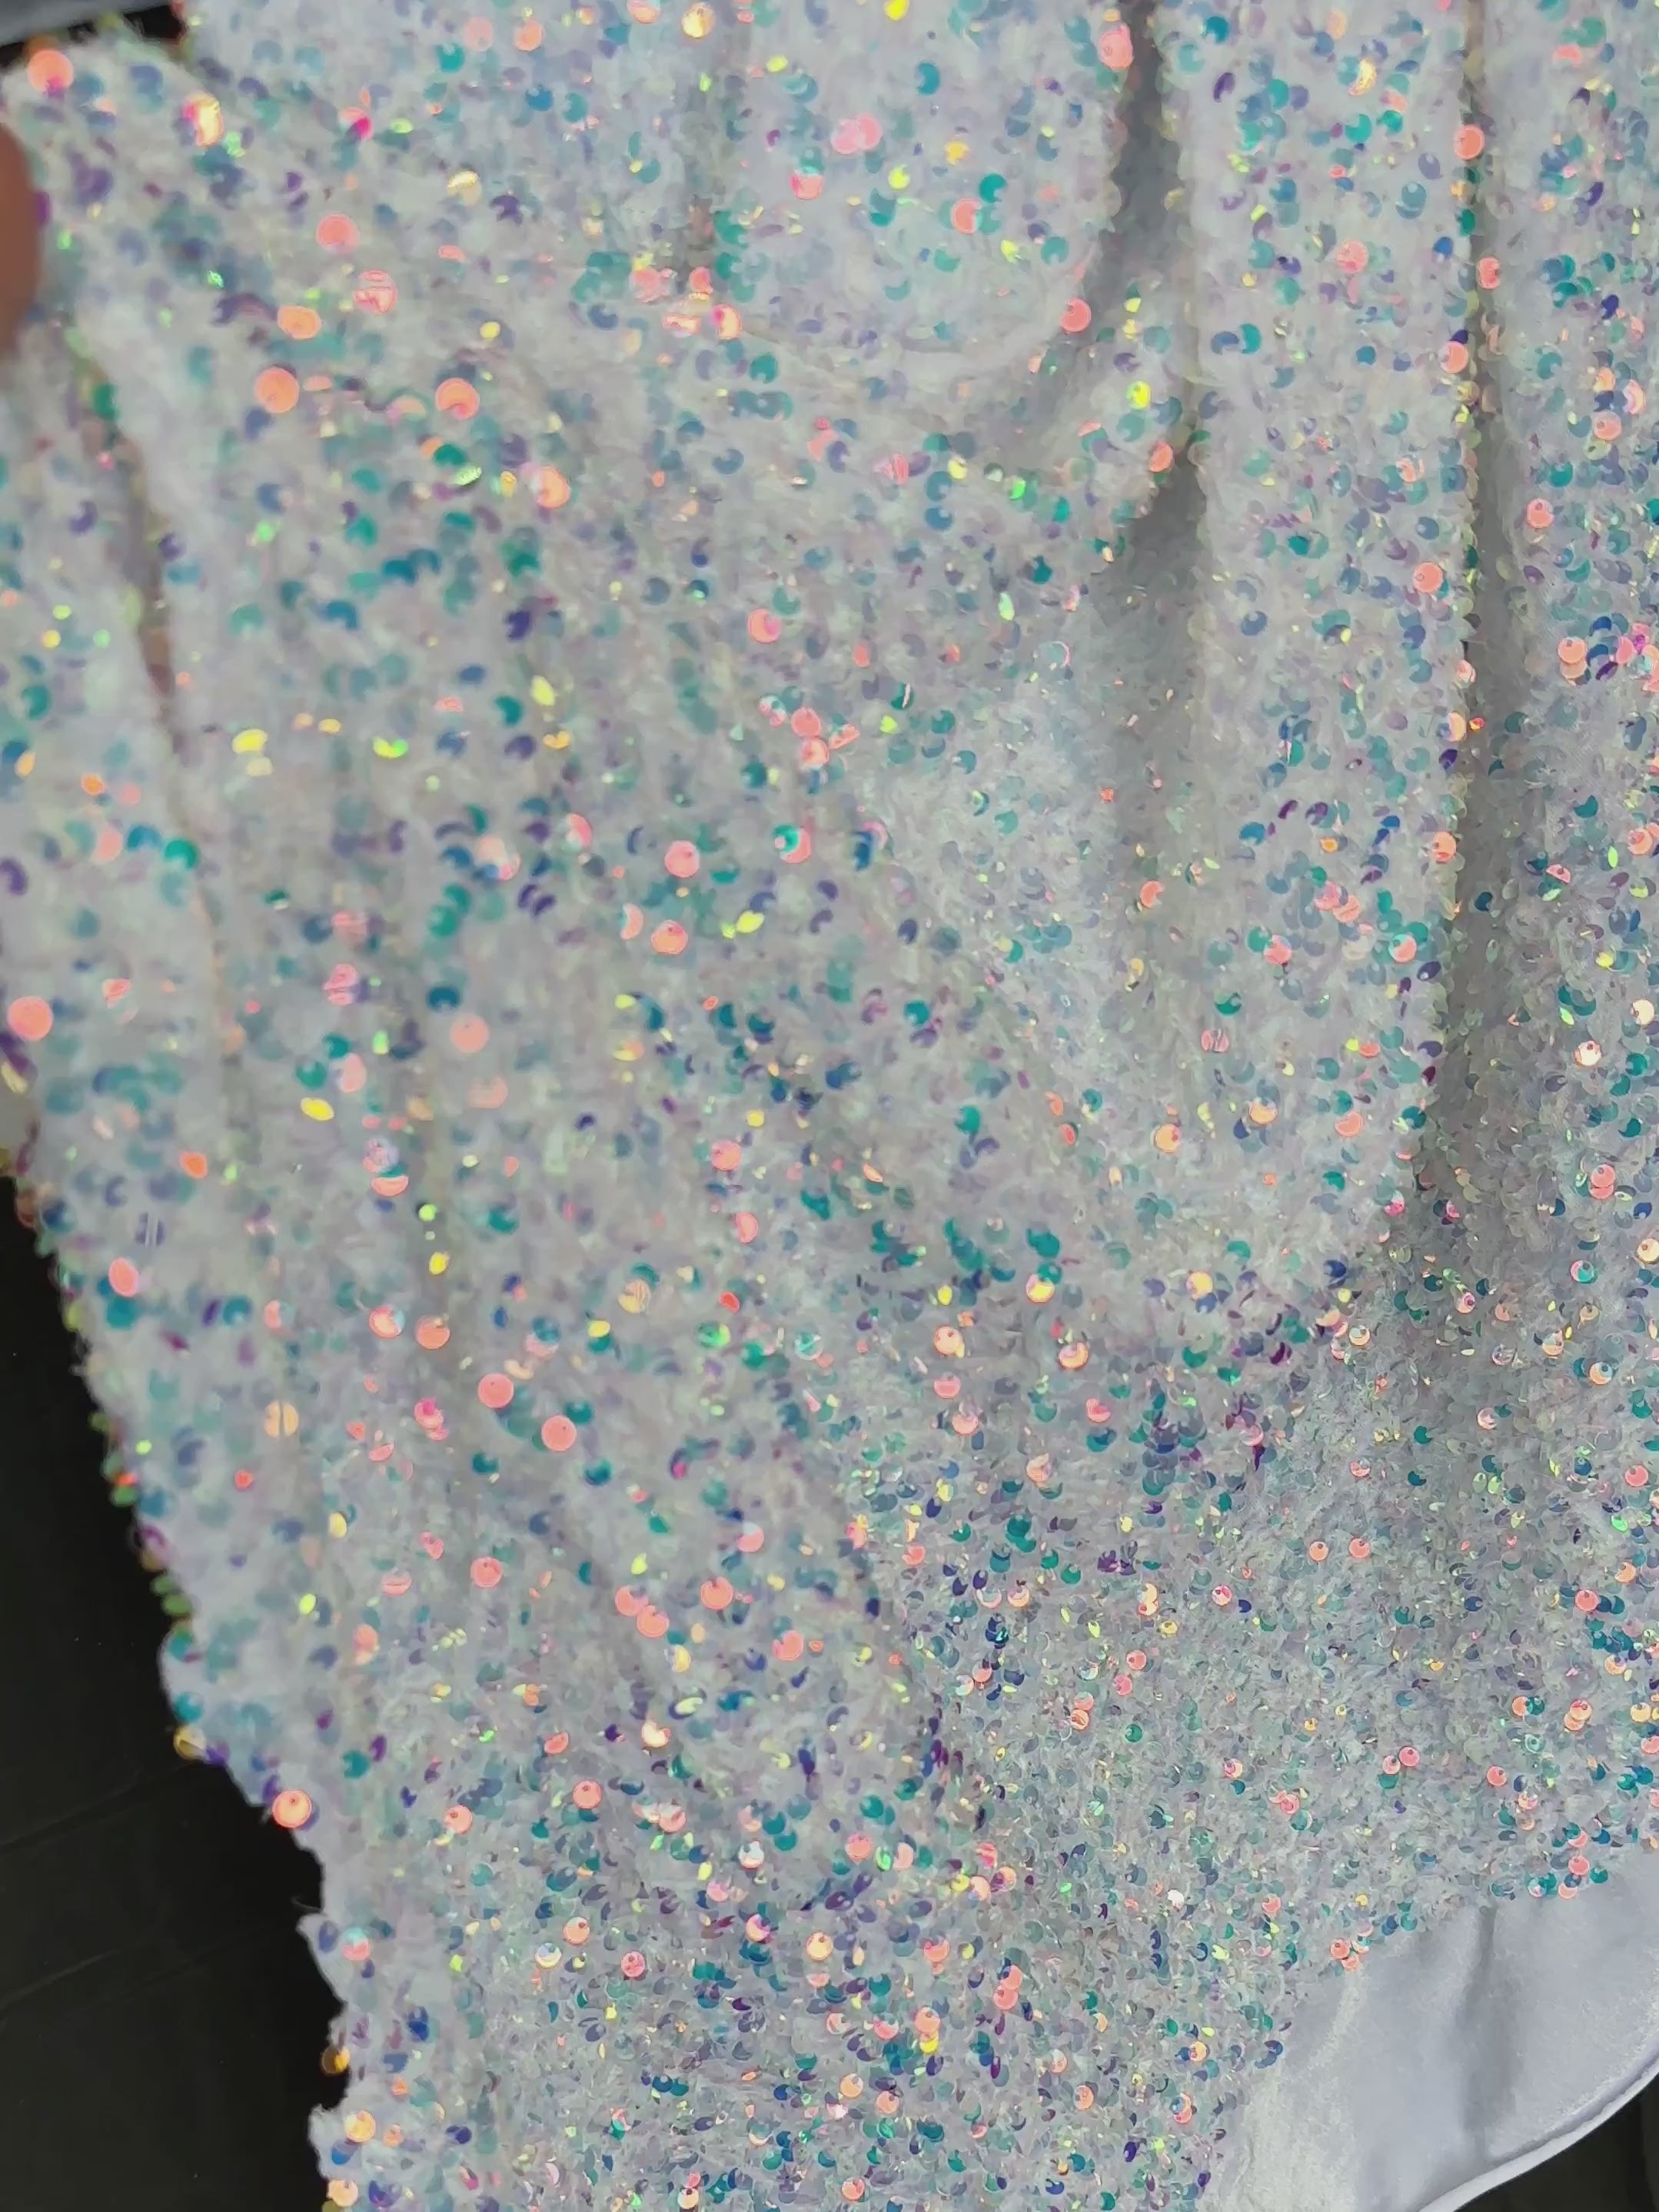 Sequins Macro Backgroundlarge Sequins In Blue And Pink Colorsfabric With  Sequins In Pastel Toneridescent Fabricscales Background Background With  Shiny Sequinstexture Scales Stock Photo - Download Image Now - iStock